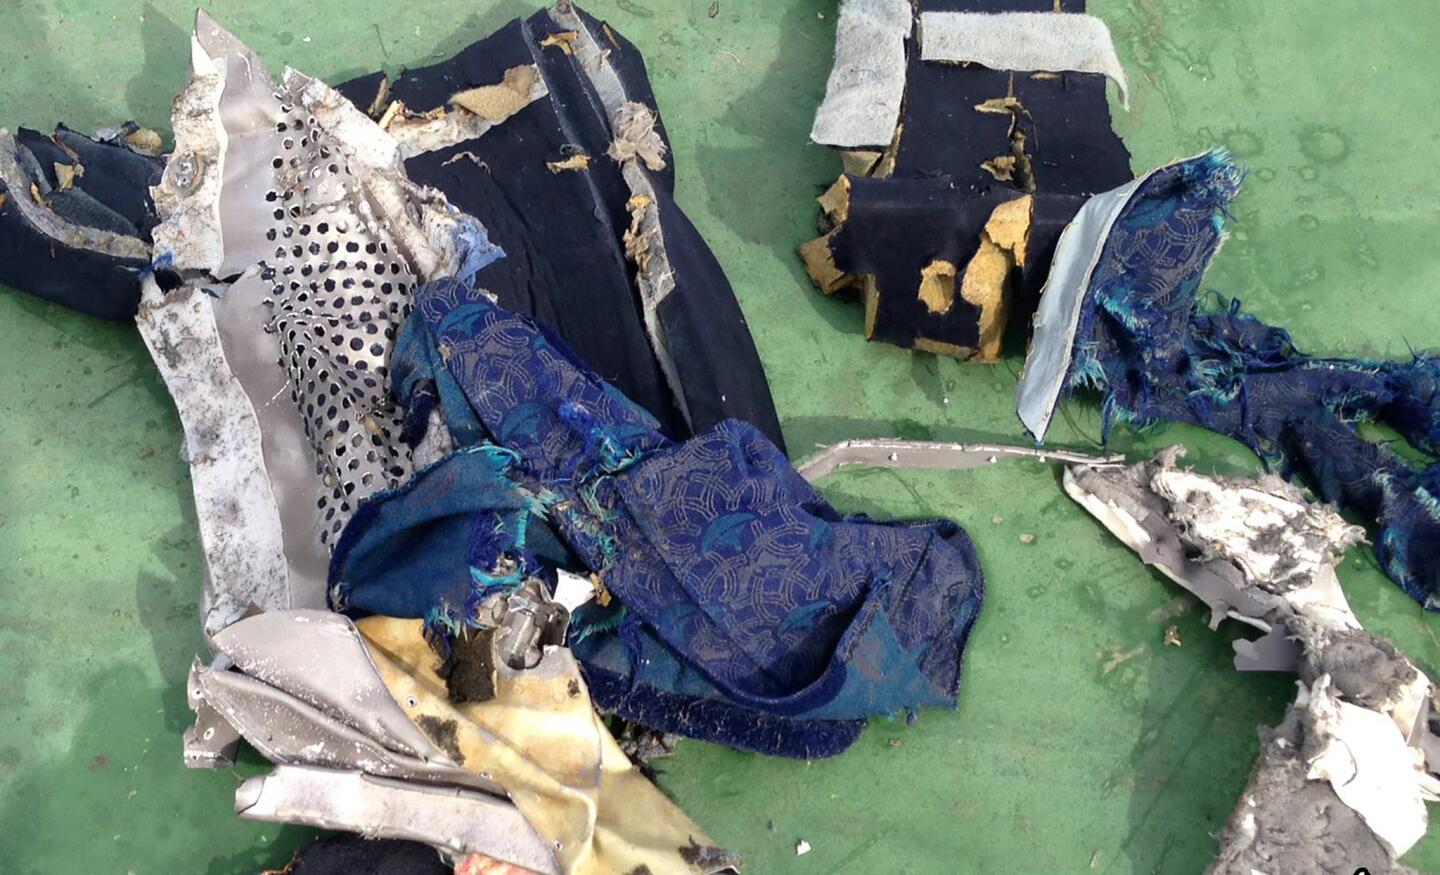 A photo on the official Facebook page of the Egyptian military spokesperson reportedly shows EgyptAir crash debris.